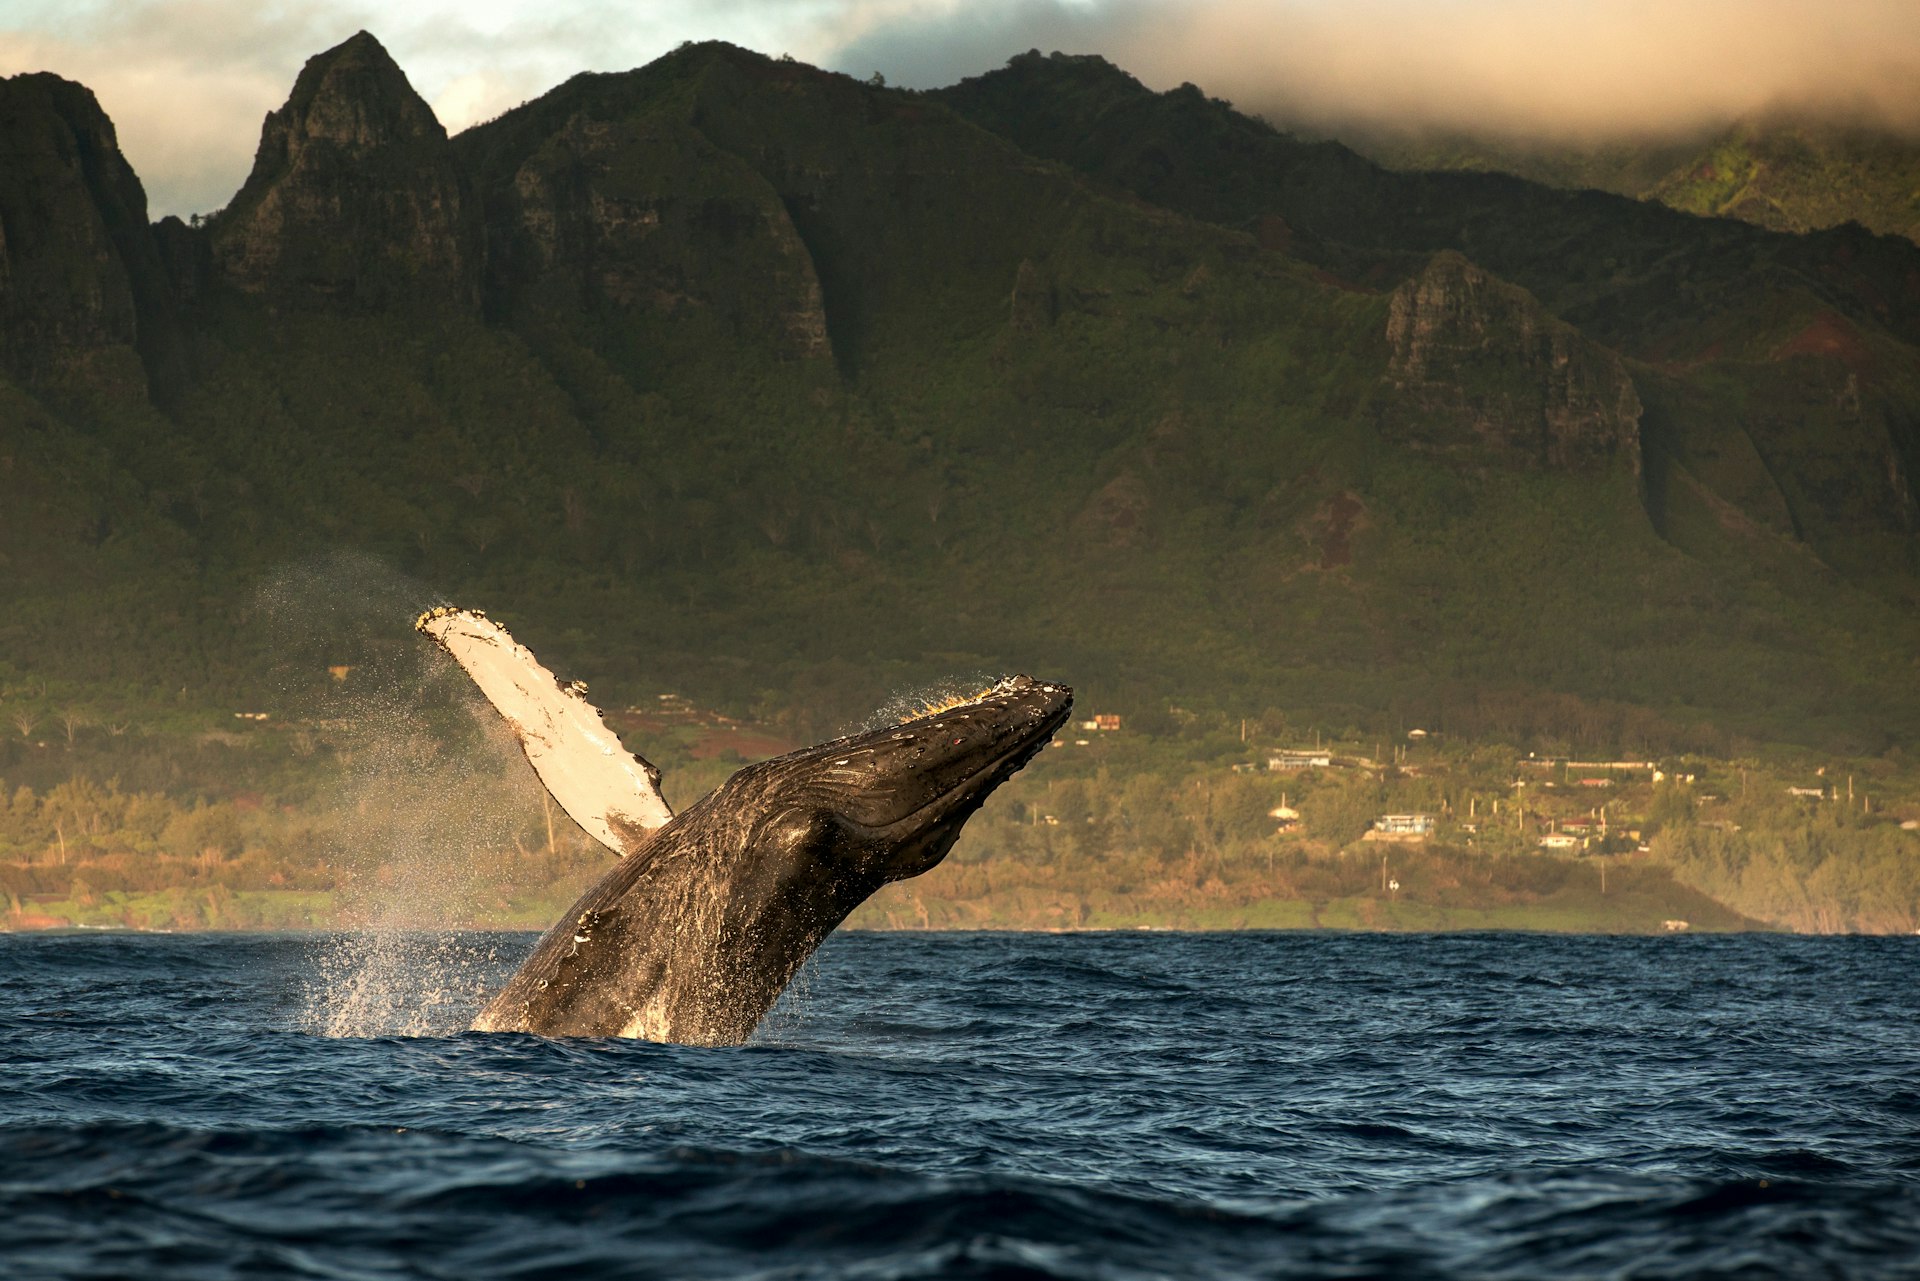 A huge, black, humpback whale jumping out of water, with volcanic rocky islands in the distance